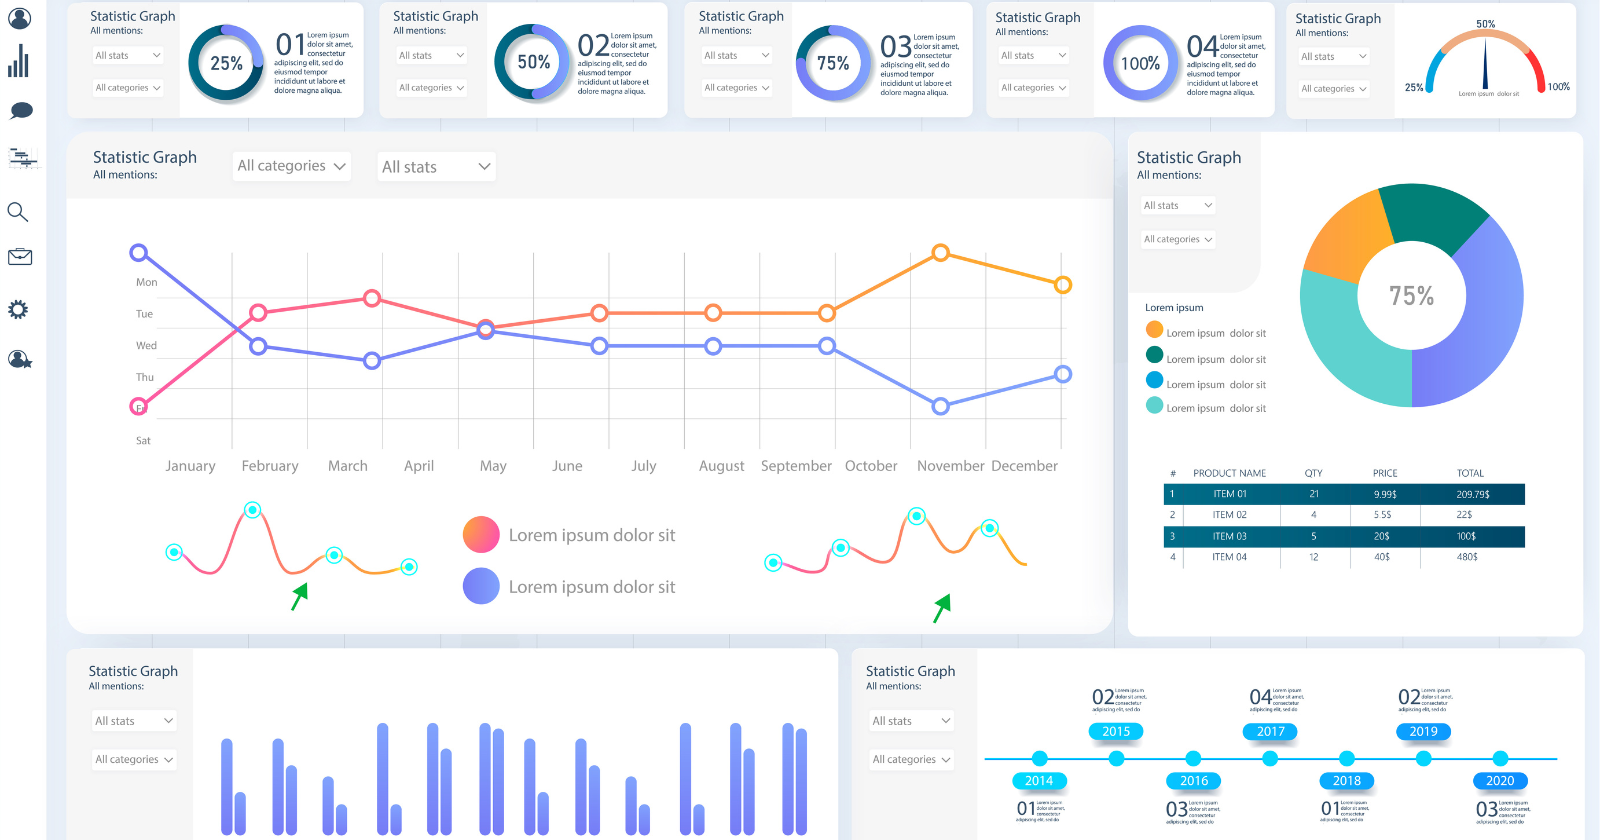 Enterprise SEO Reporting: Tips For Developing Effective Dashboards